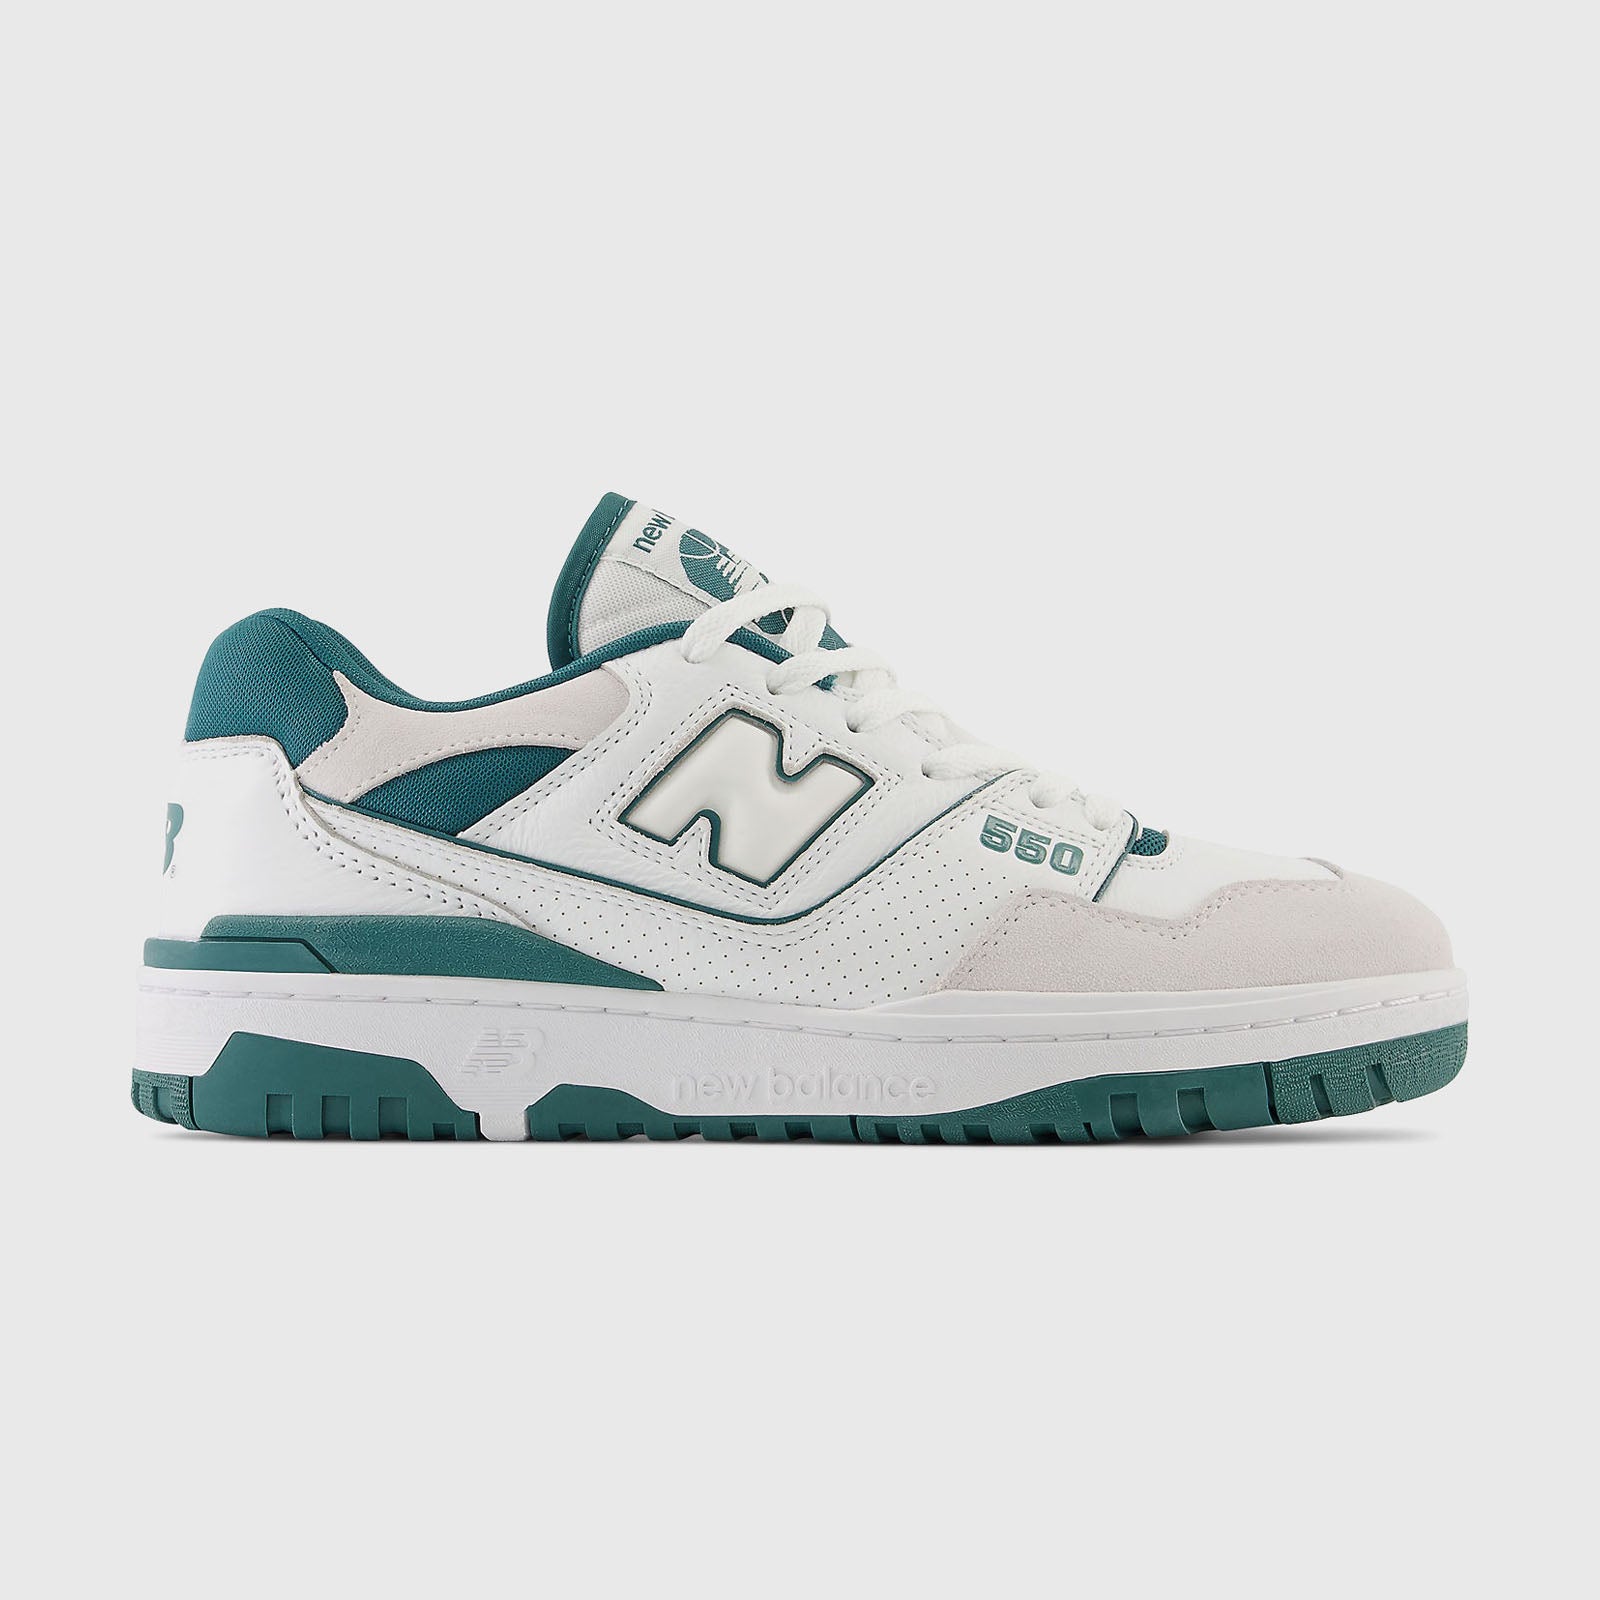 Discover more than 185 new balance sneakers super hot